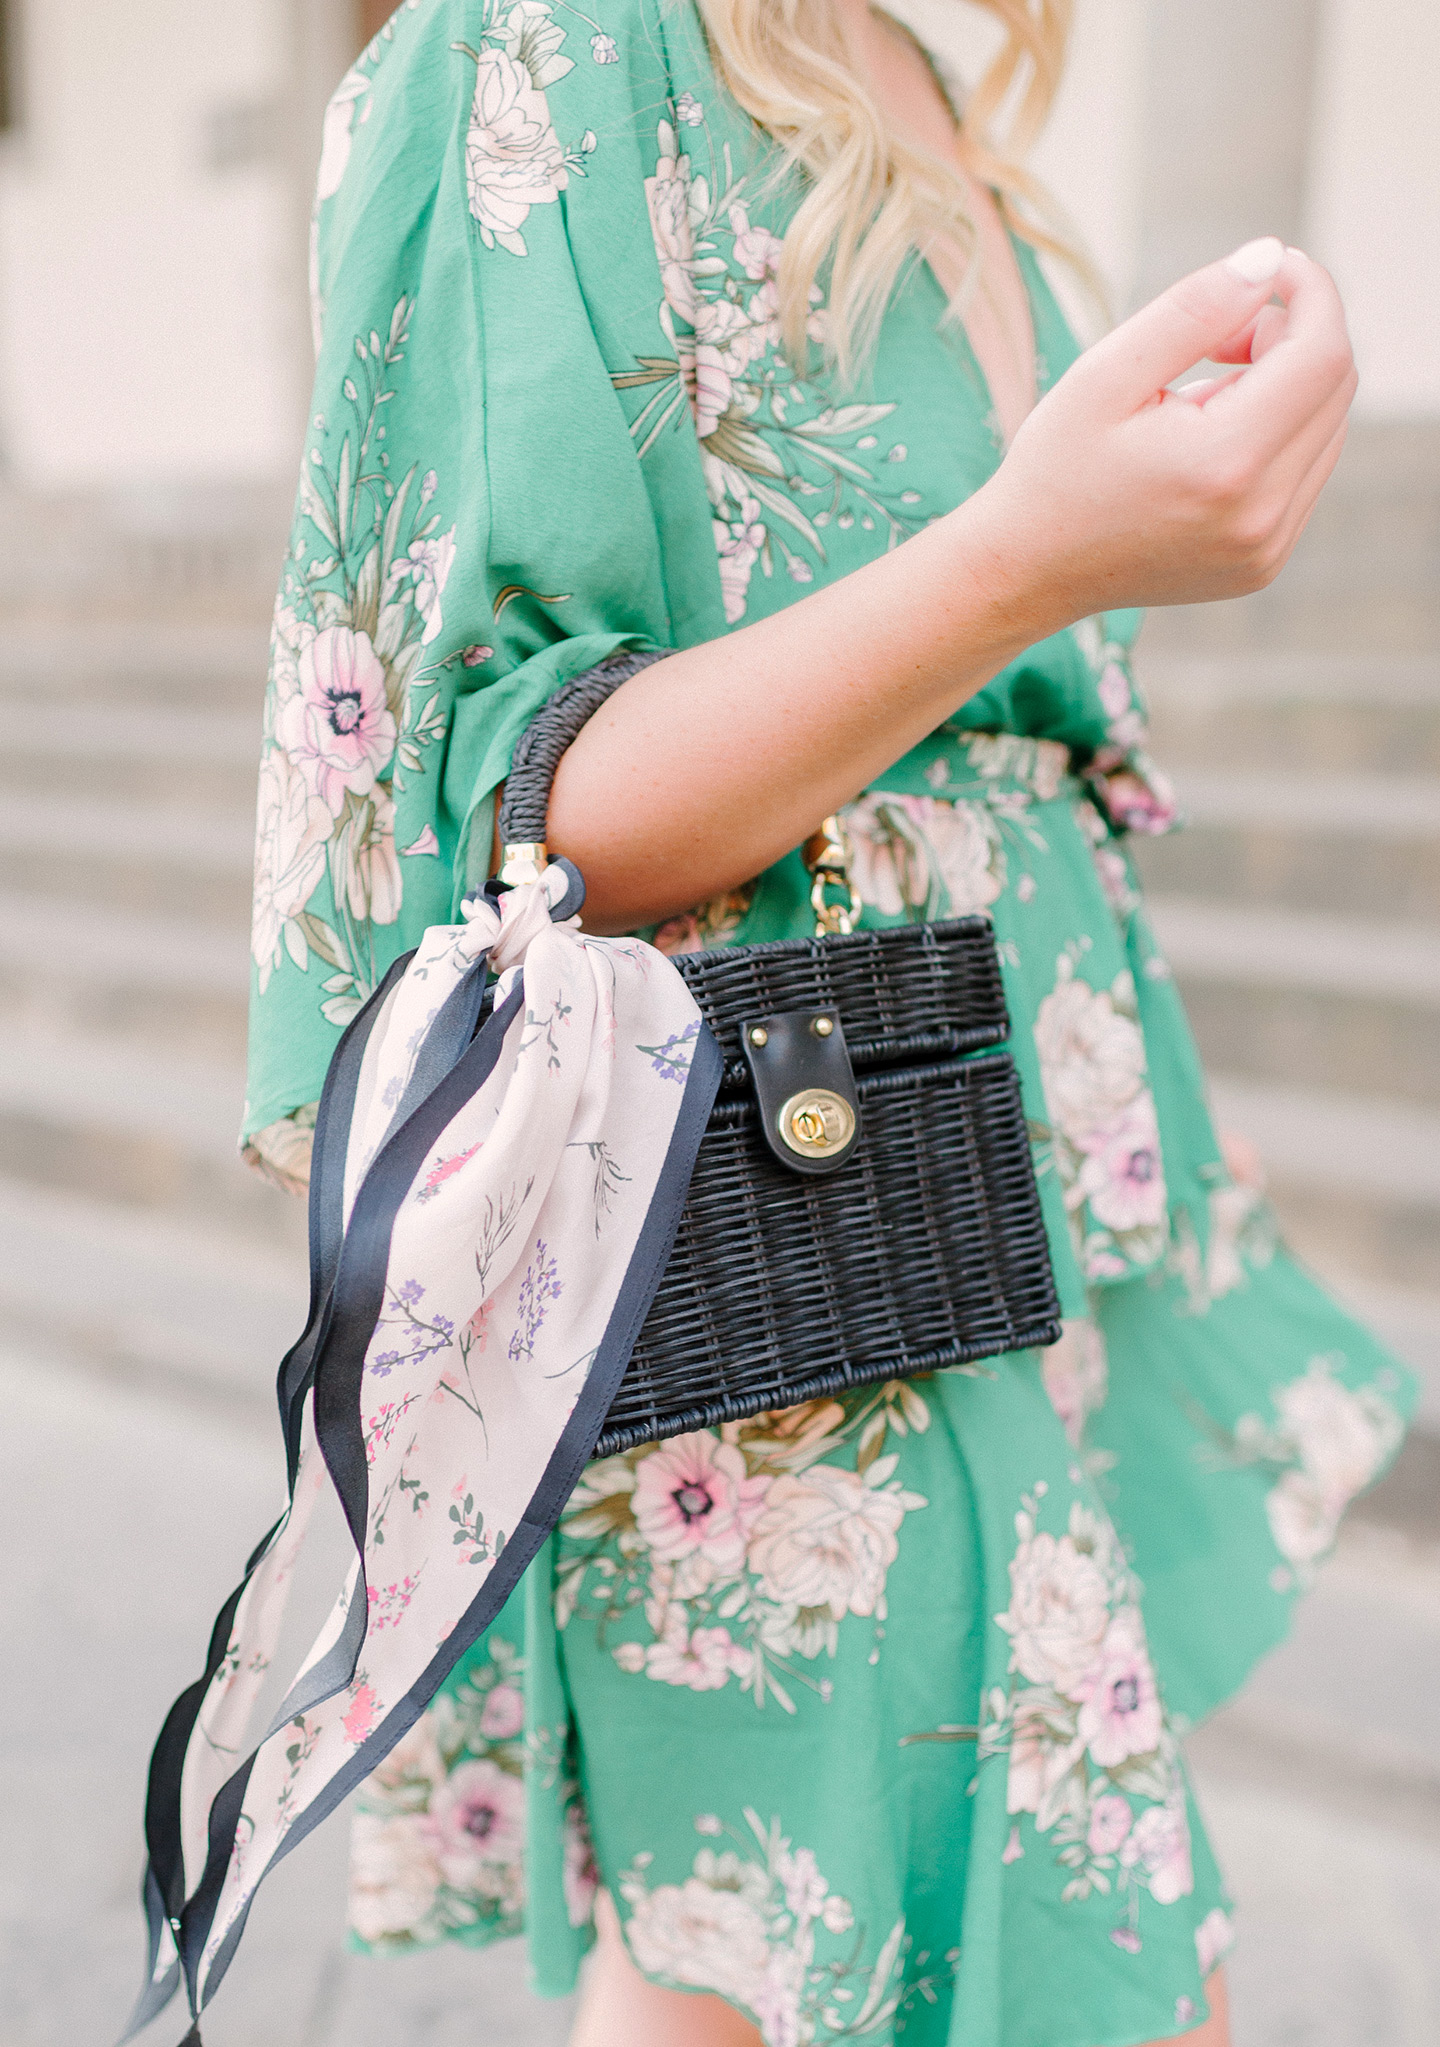 Green Floral Kimono Dress in Florence, Italy